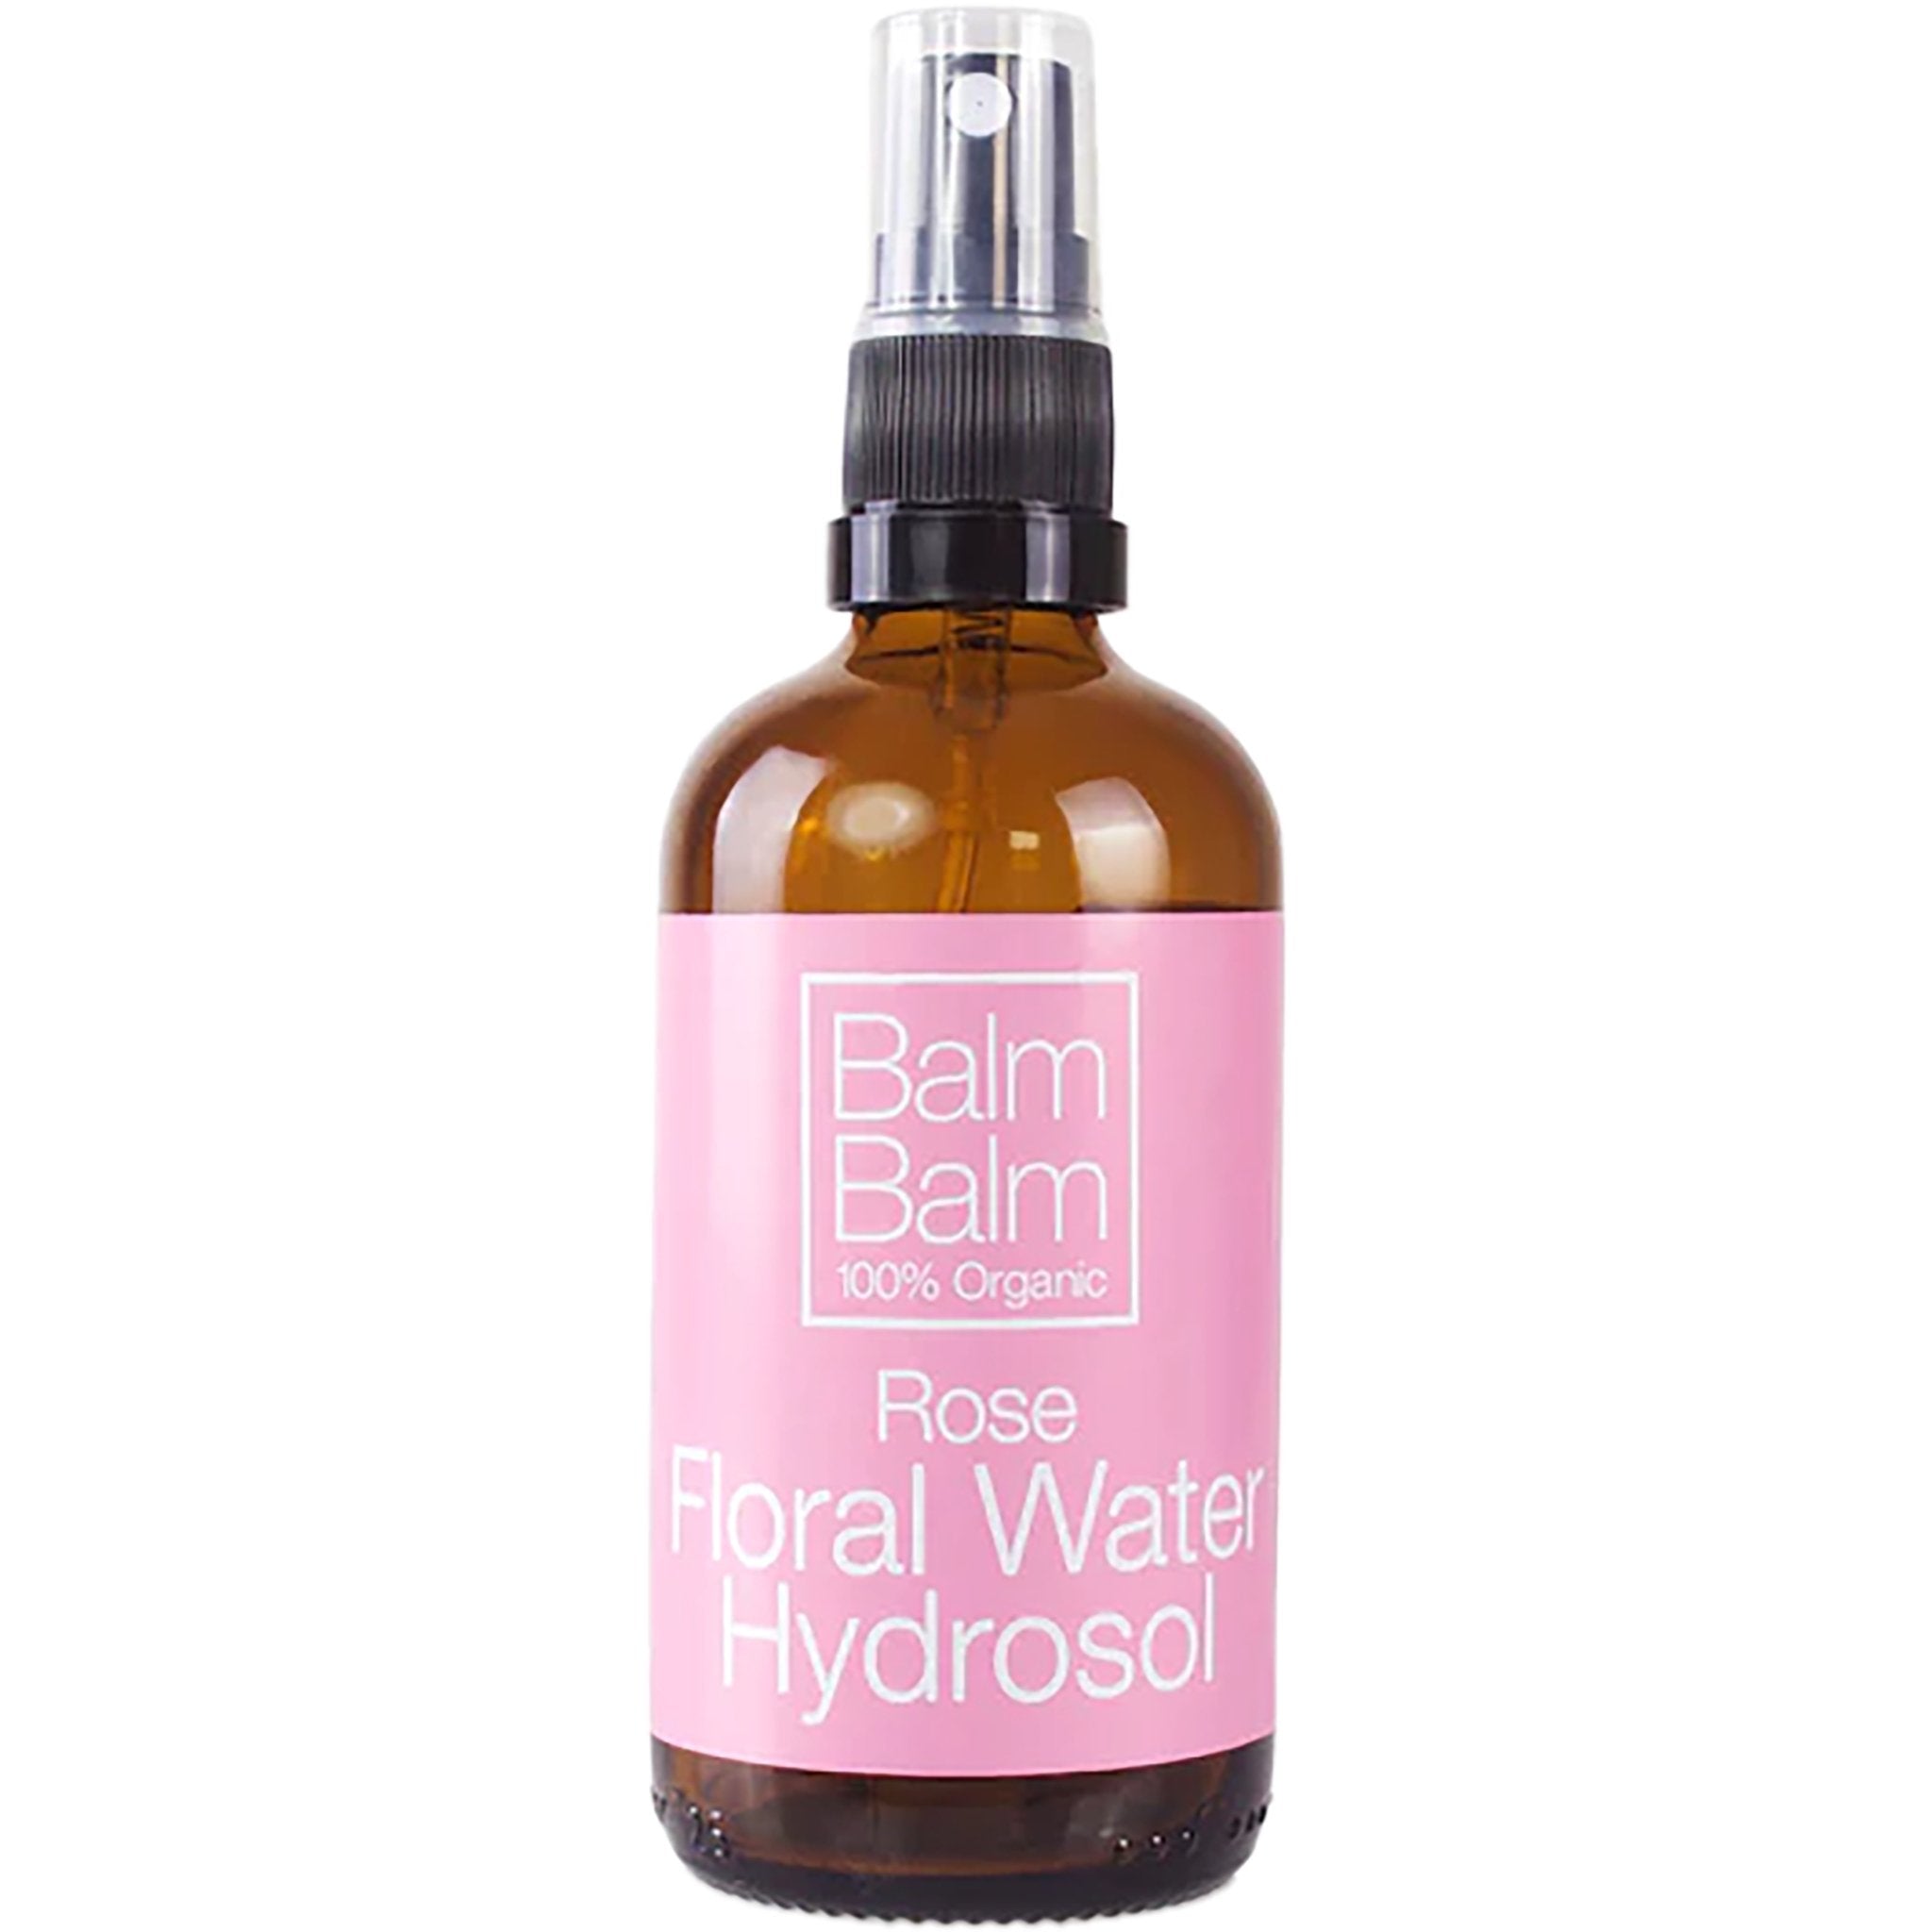 Rose Floral Water - mypure.co.uk